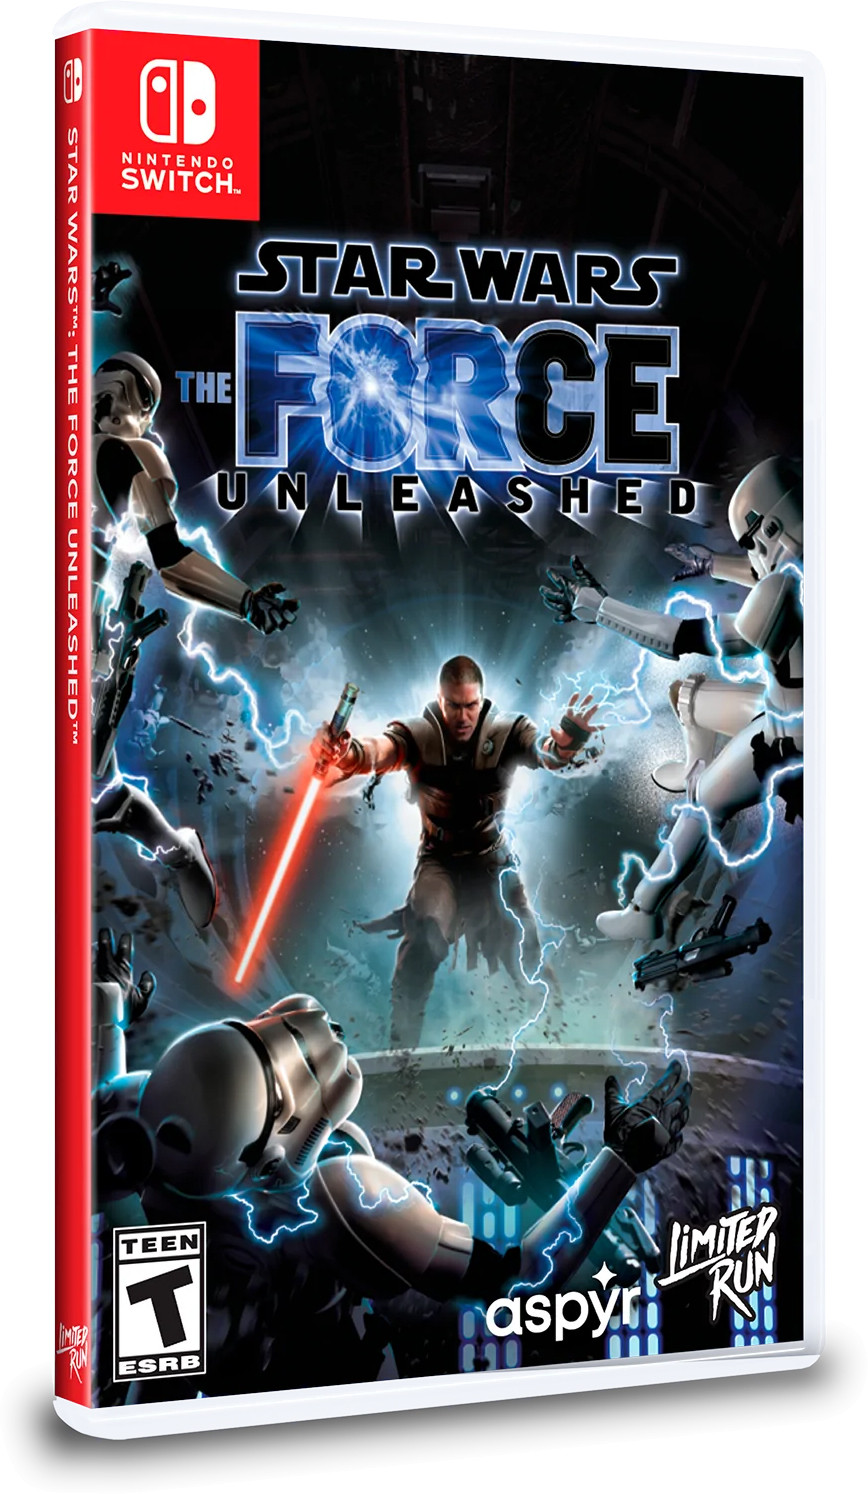 Star Wars The Force Unleashed (Limited Run Games)